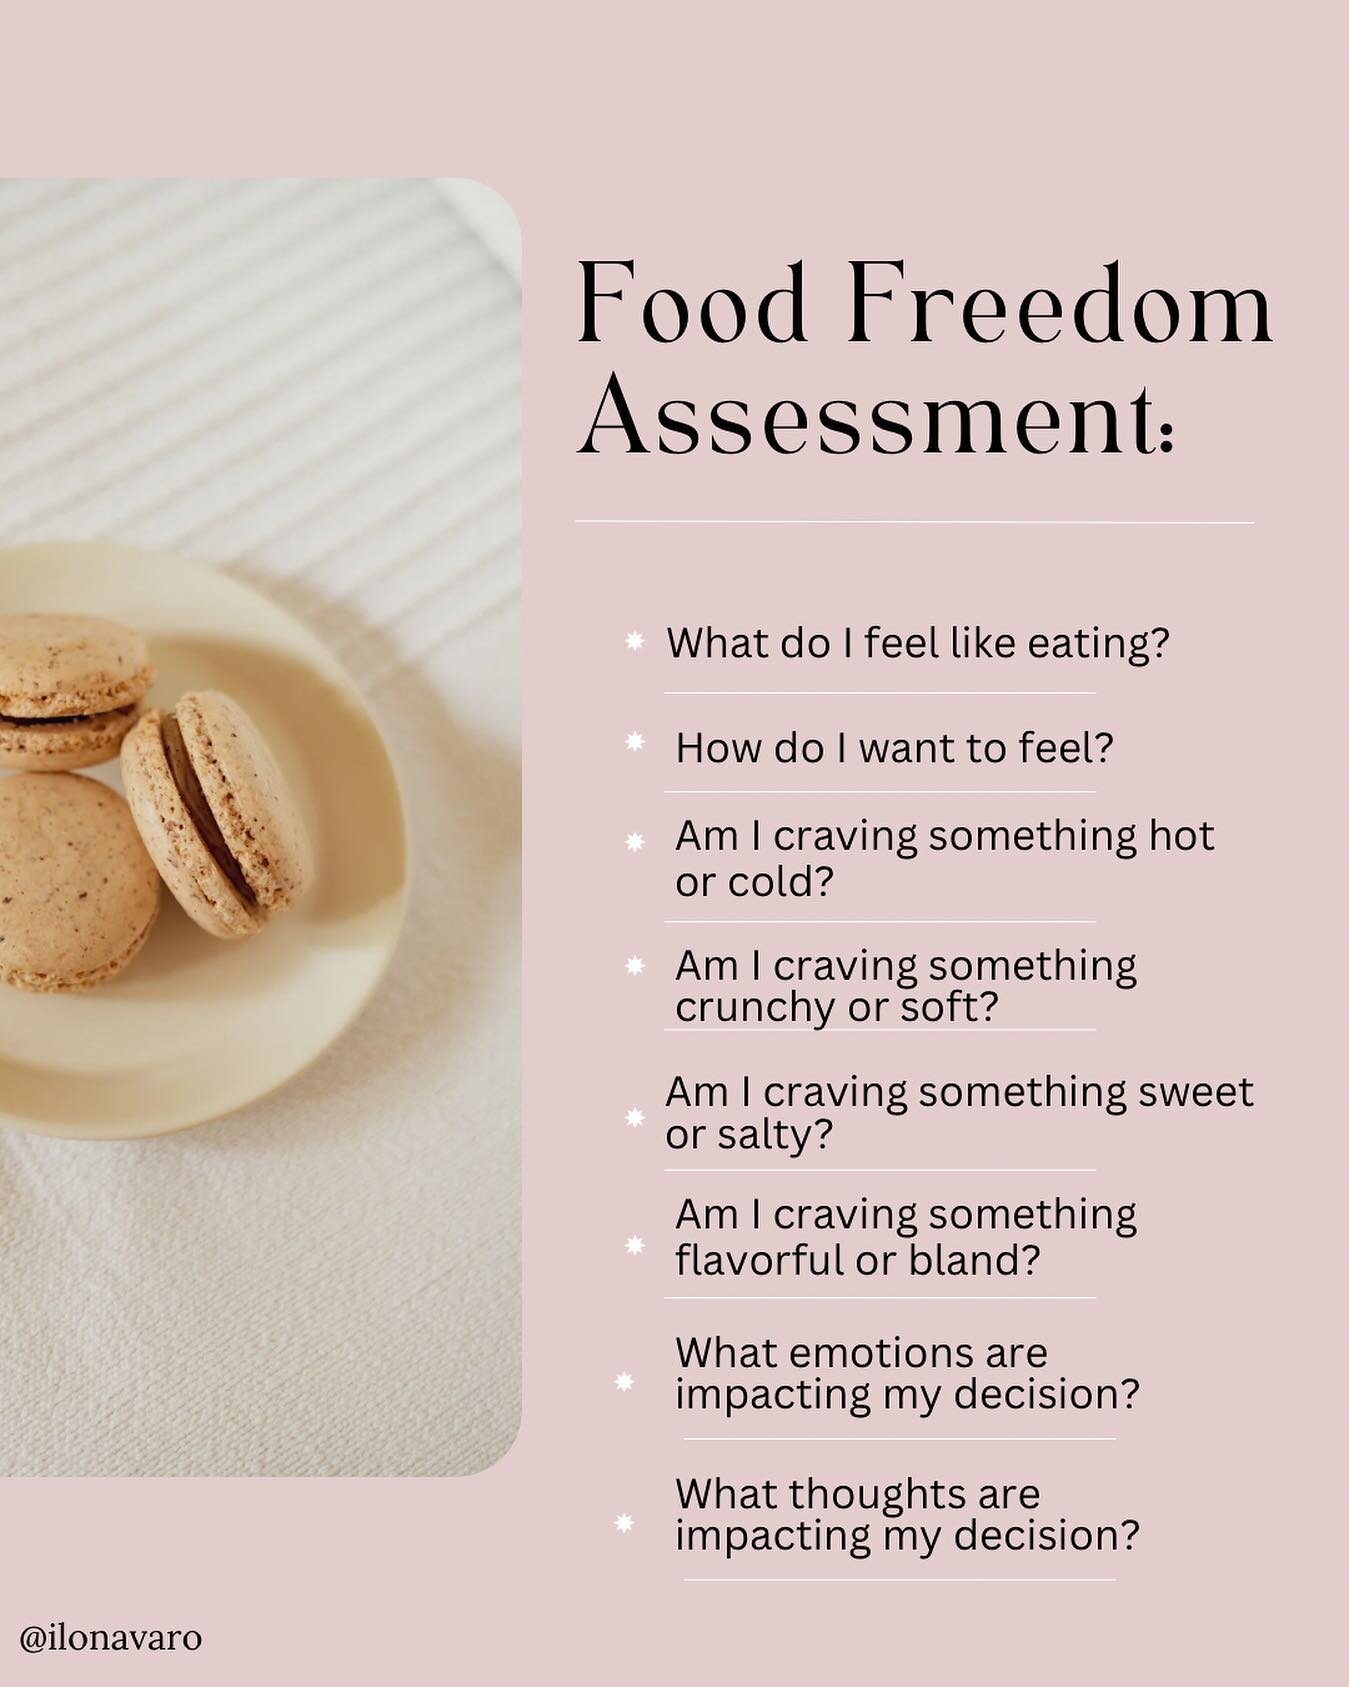 Here are just a few ways to help assess food freedom. 

By attuning to your physical and psychological needs, you learn to have a stronger connection and communication with your body. 

It&rsquo;s important to be attuned to your body's wants and need